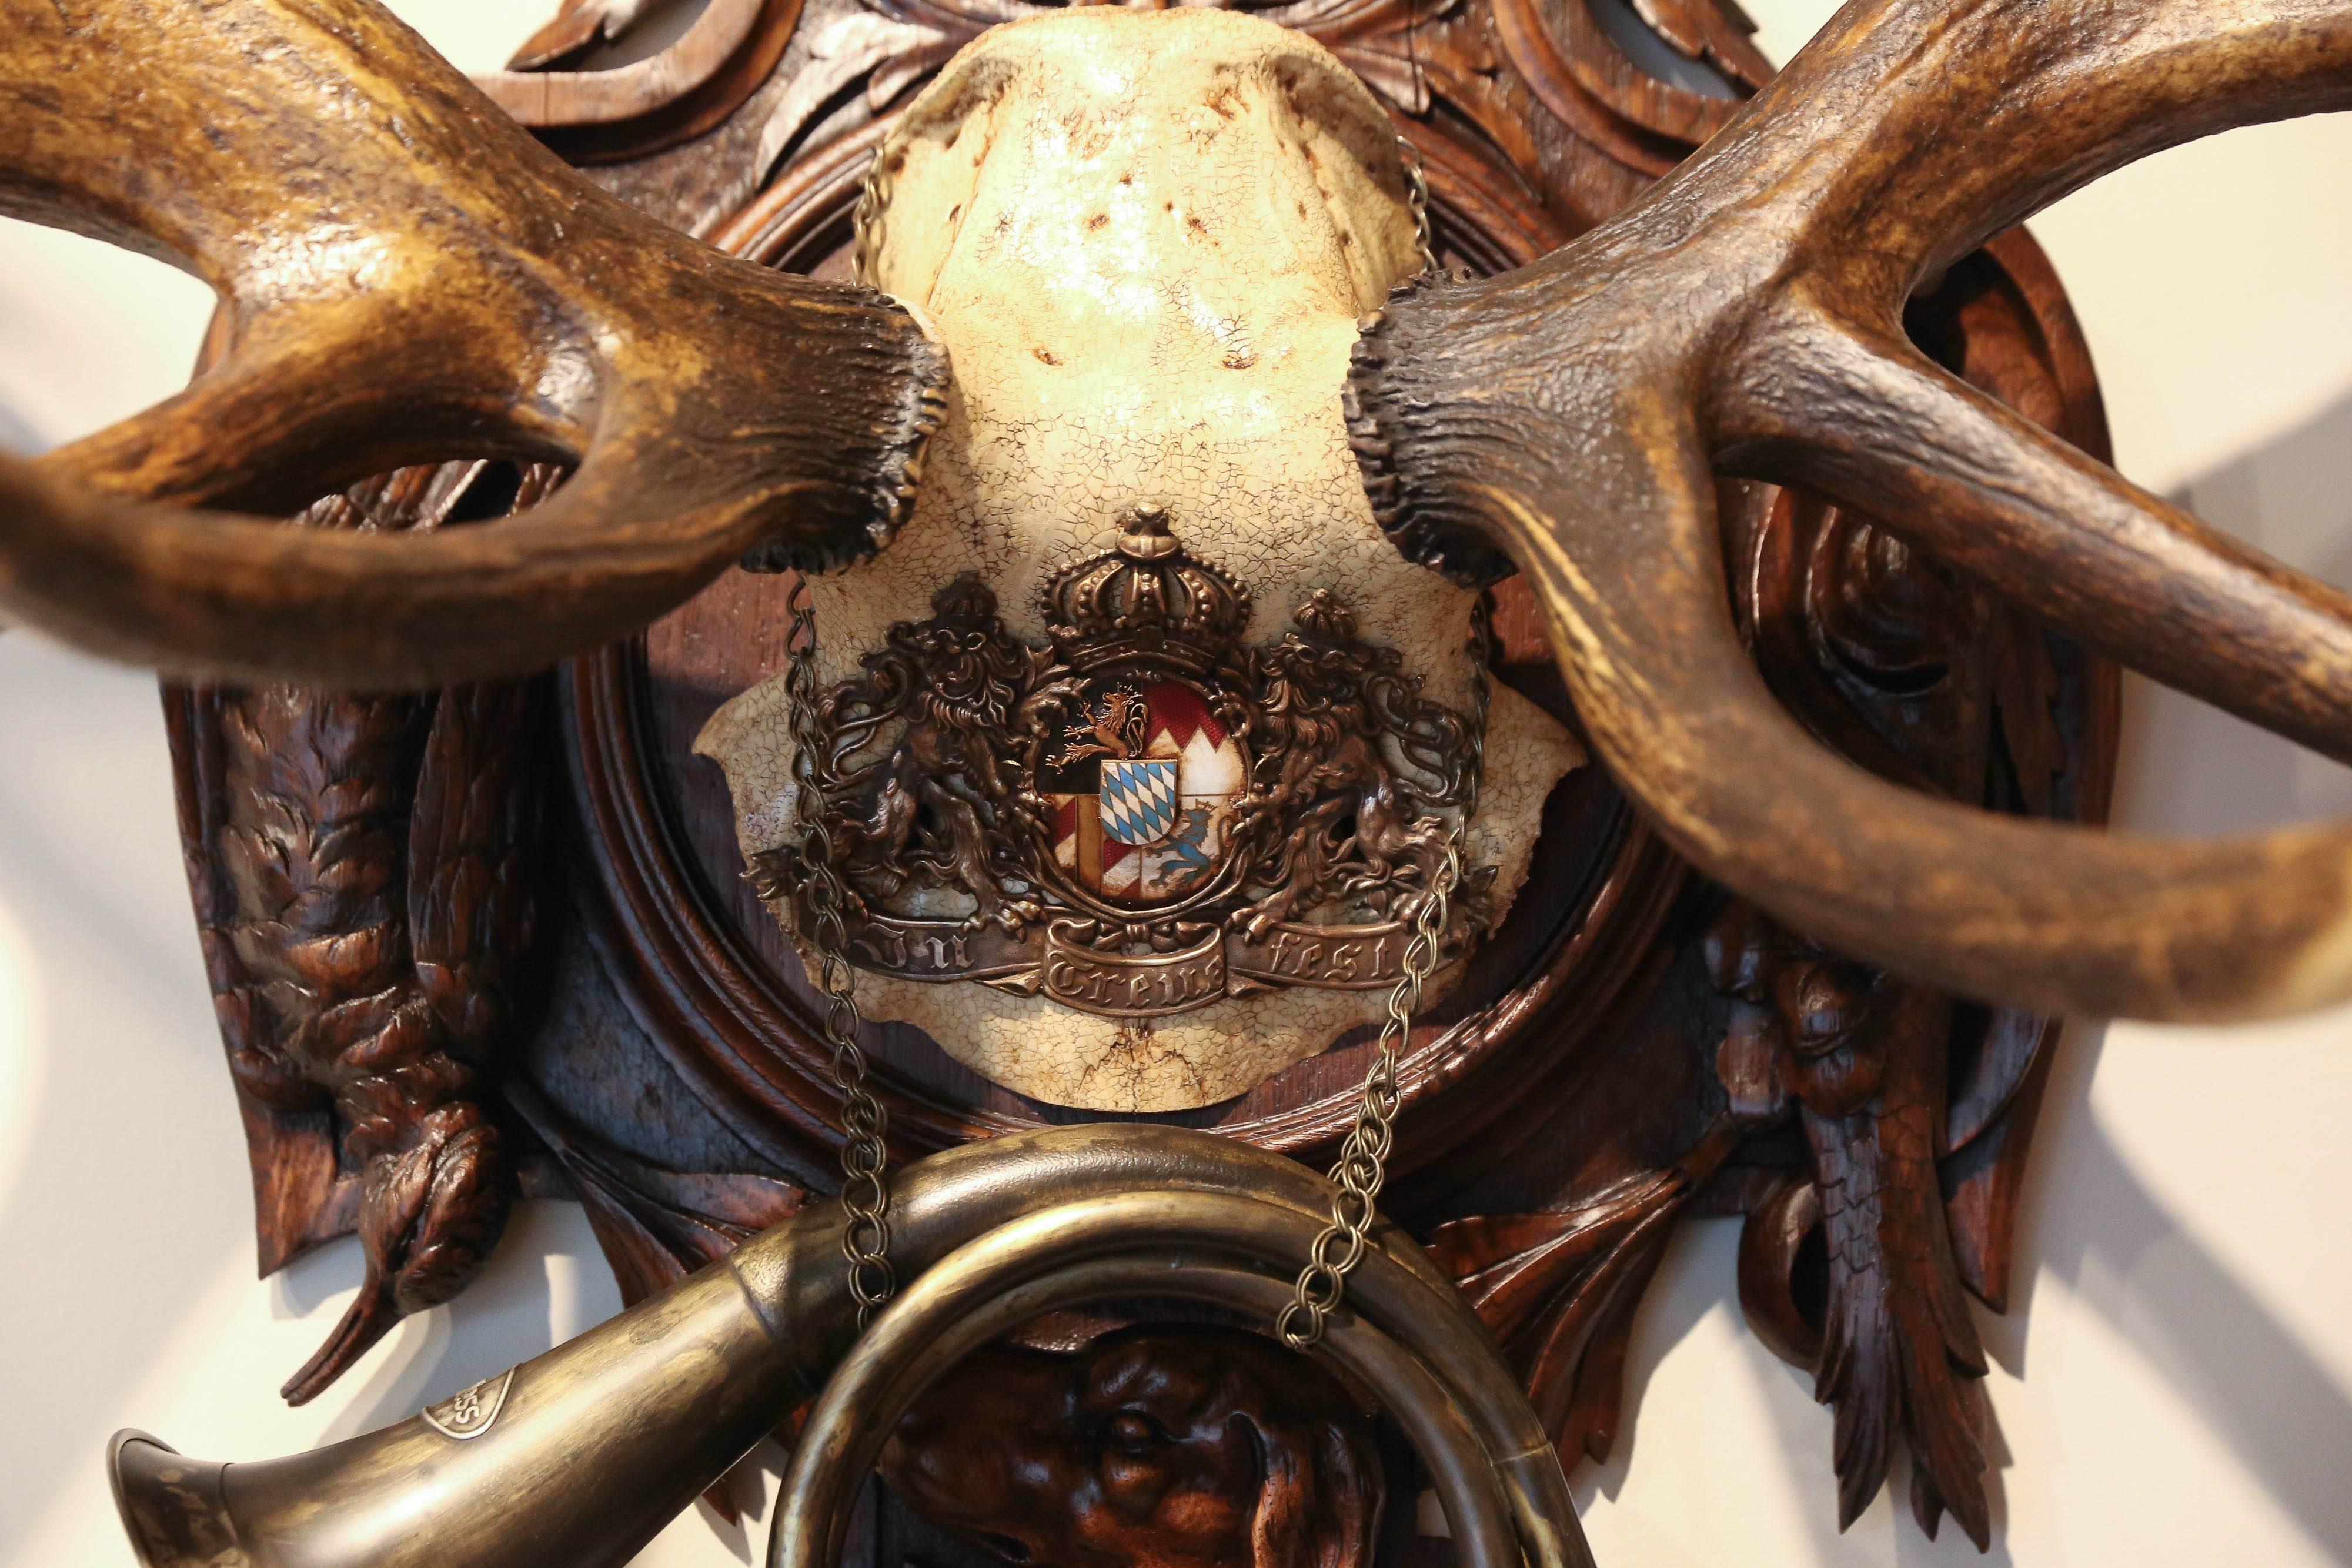 Magnificent red stag trophy from the Habsburg hunting schloss (castle) of Emperor Franz Joseph at Eckartsau in the Southern Austrian Alps. Decorated with a wappen from an officer's pickelhaube or helmet and the original fürst pless hunting Horn